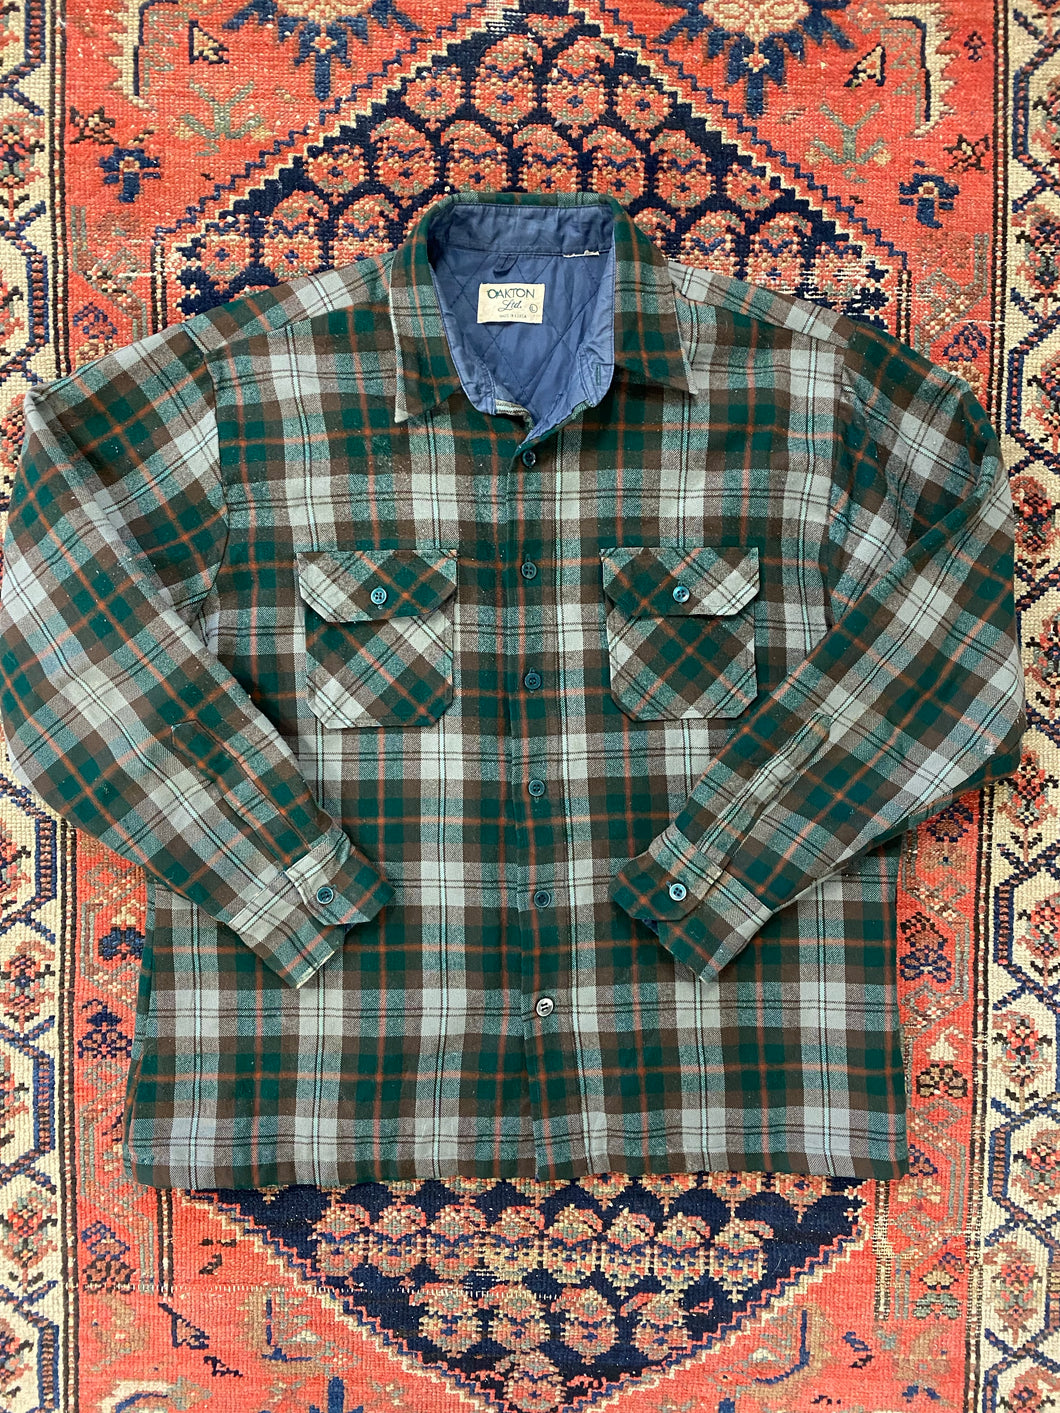 Vintage Quilted Plaid Shirt - M